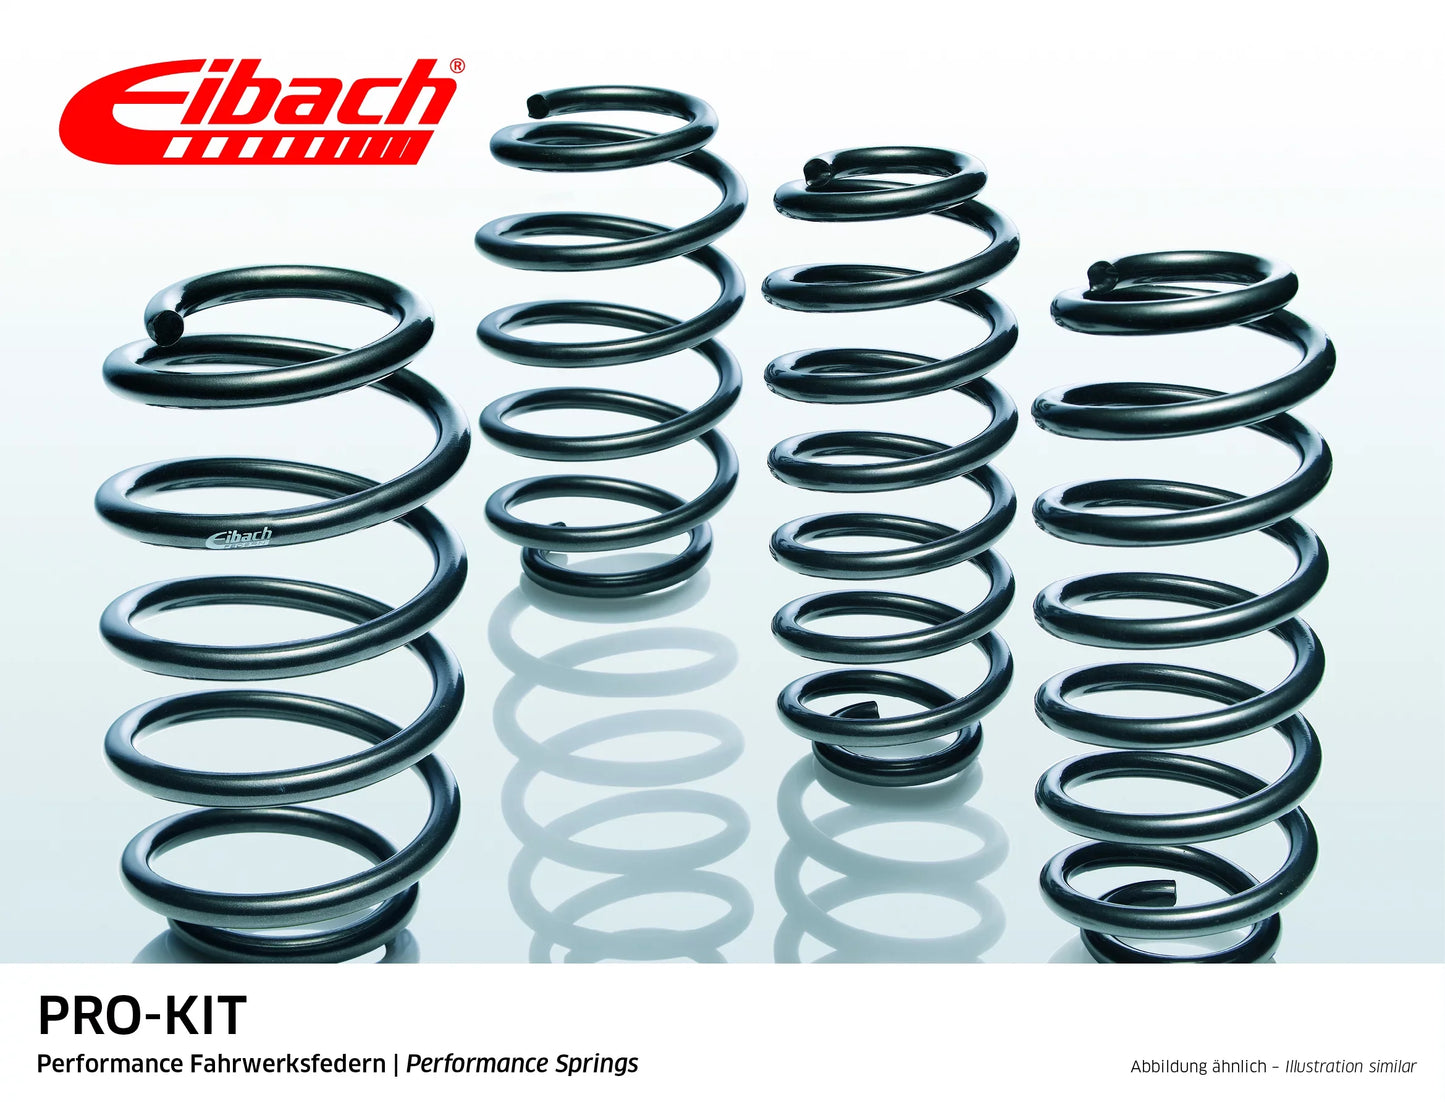 Eibach Pro-Kit Lowering Springs (E10-15-007-06-22) at £235.25